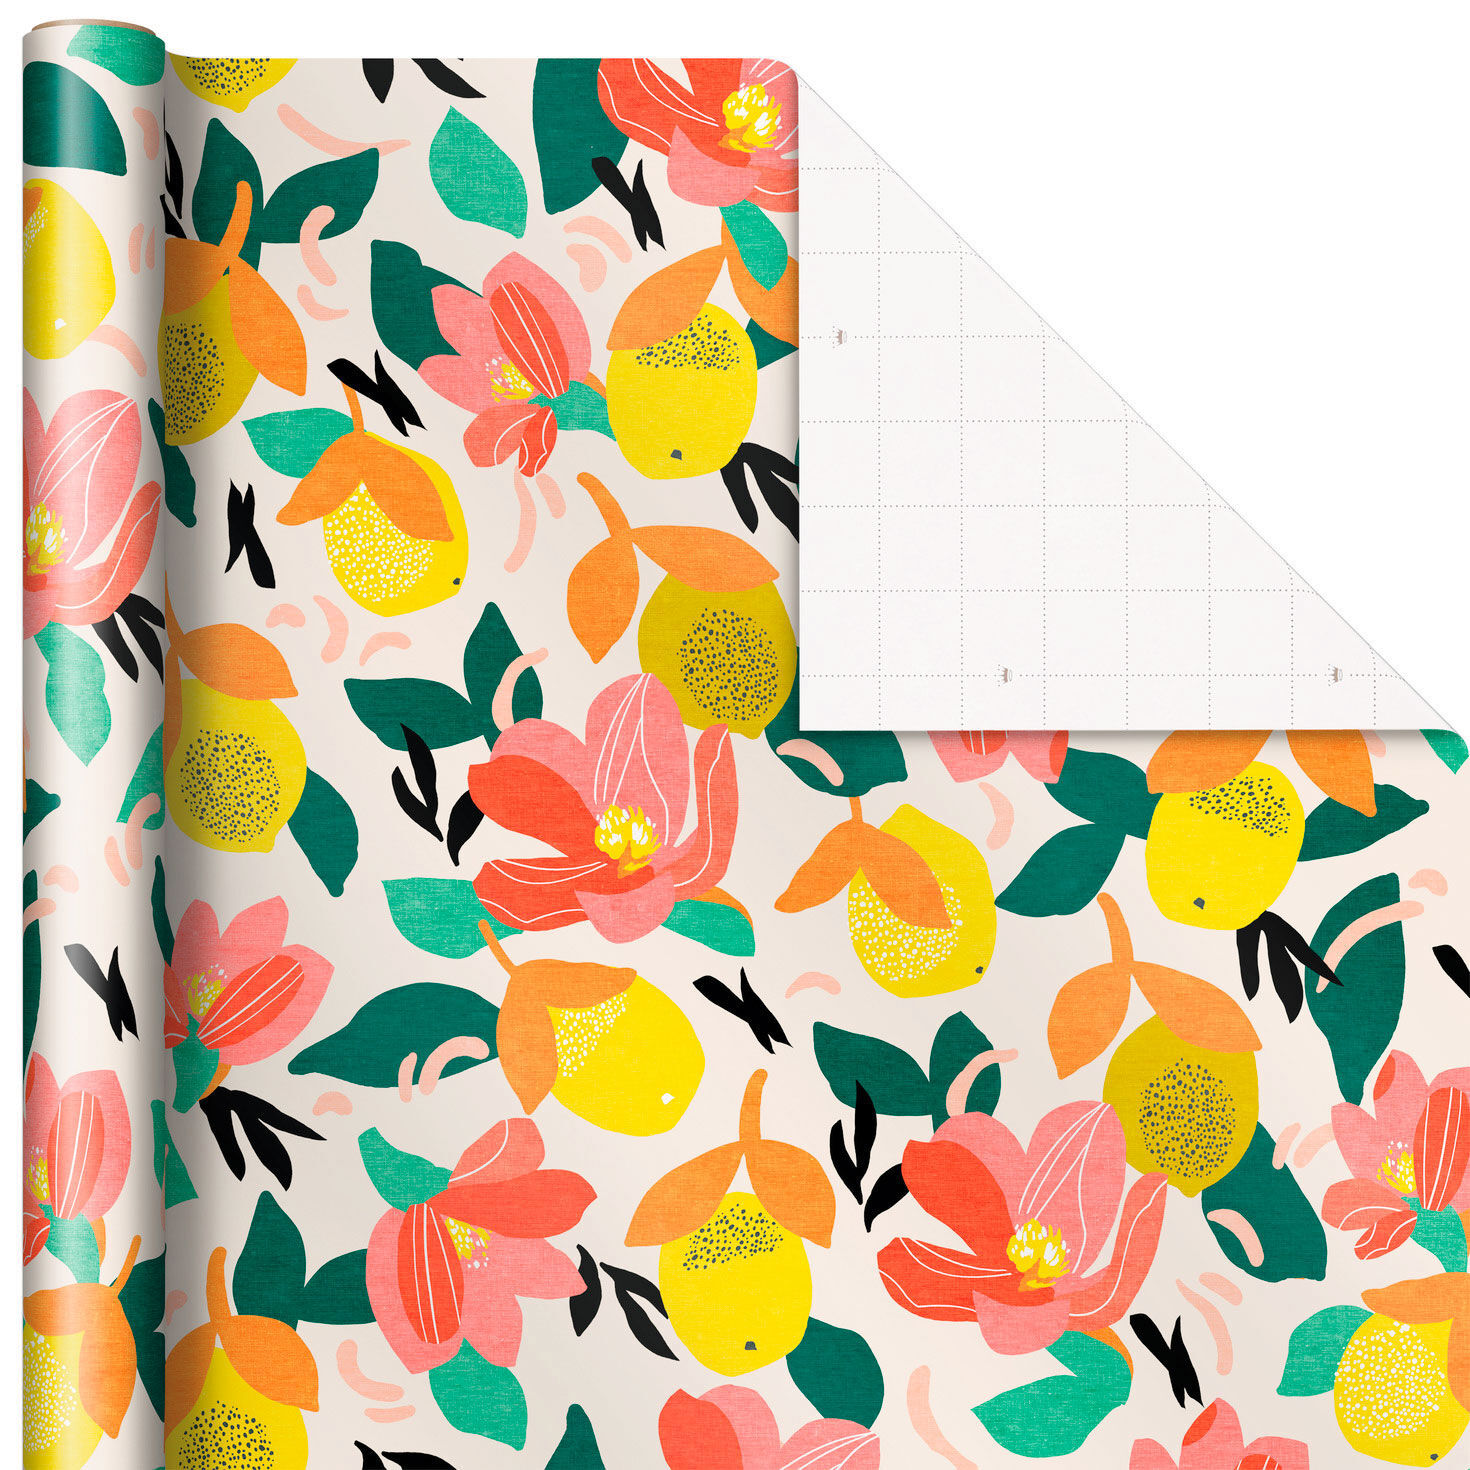 Tropical Fruit and Flowers Wrapping Paper, 20 sq. ft. - Wrapping